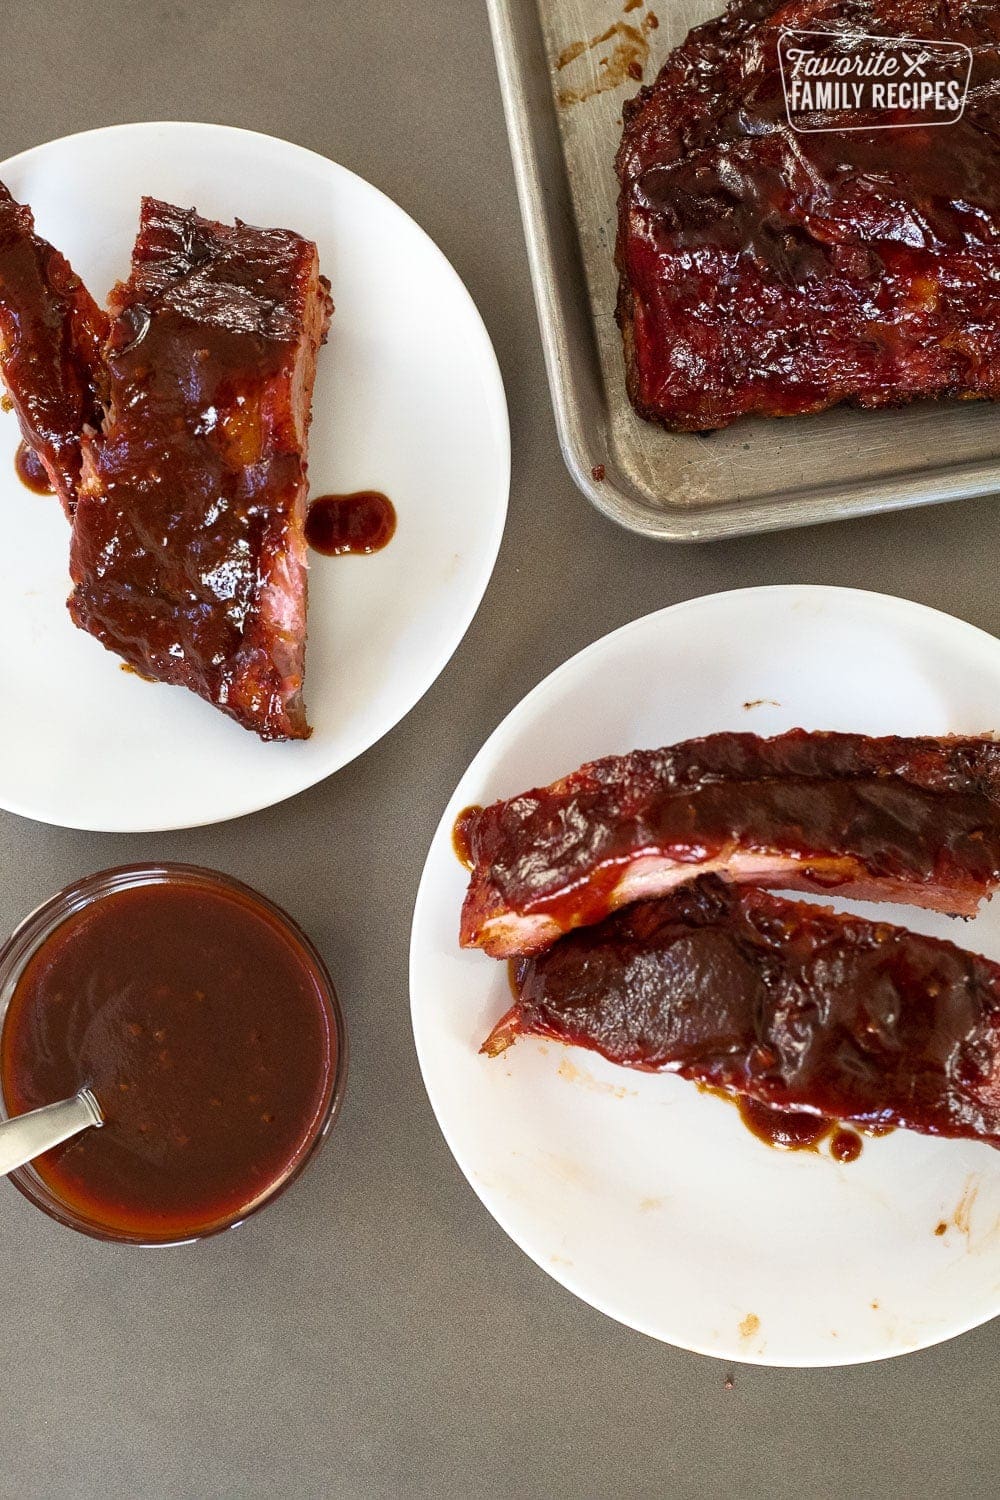 Smoked ribs with a side of bbq sauce